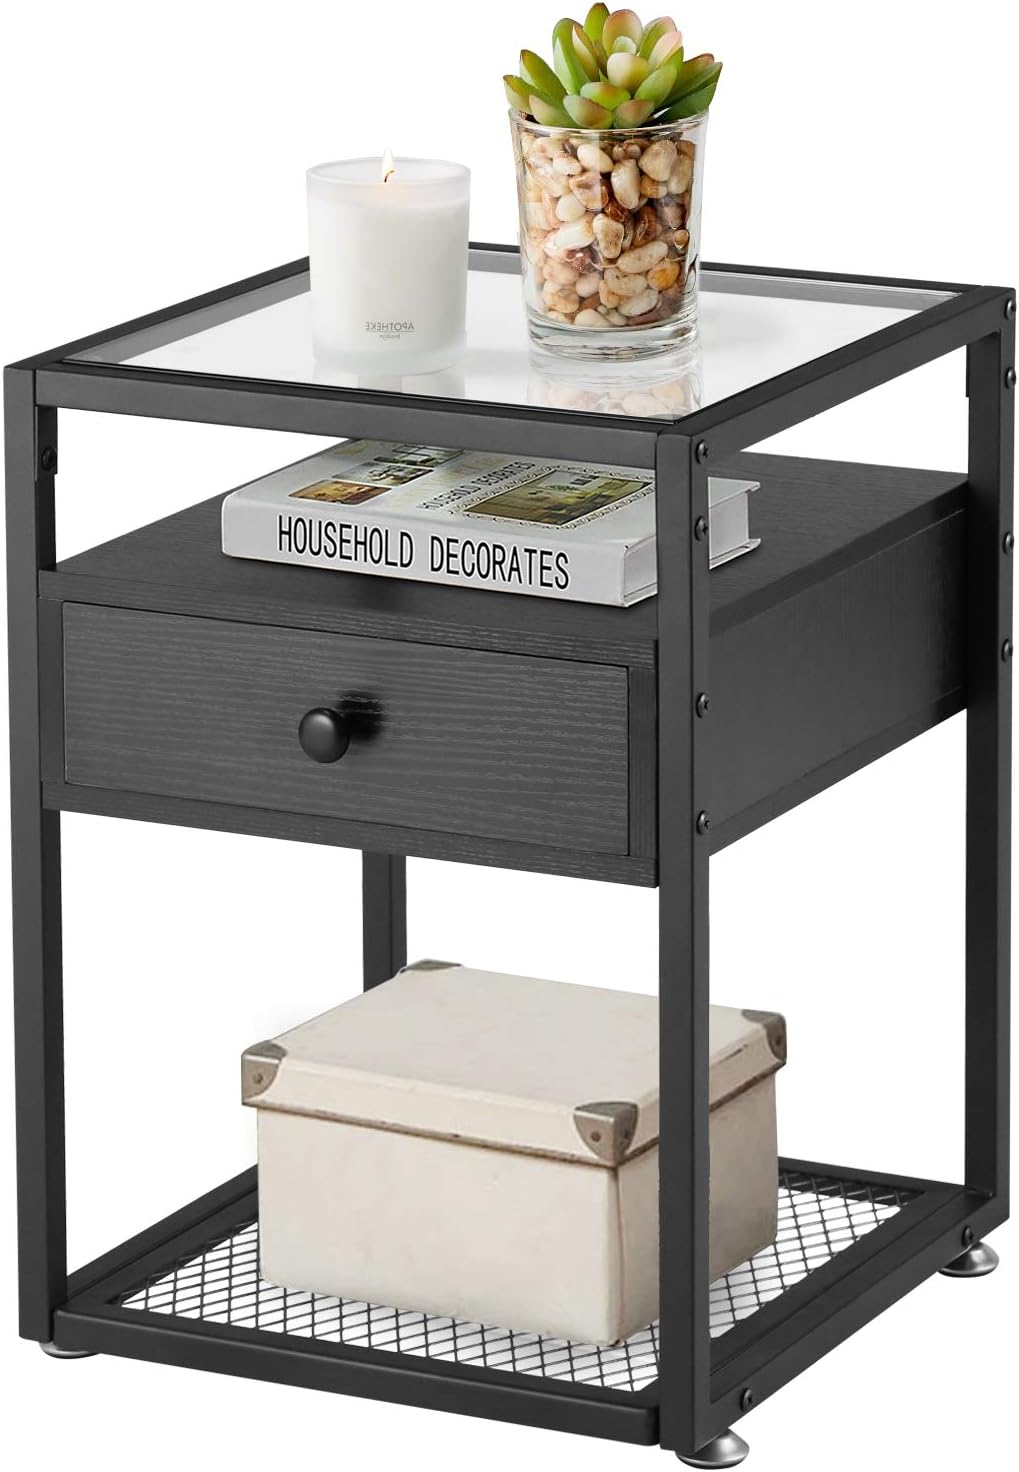 VECELO Nightstands,Glass Top End Tables with Drawer and Shelf